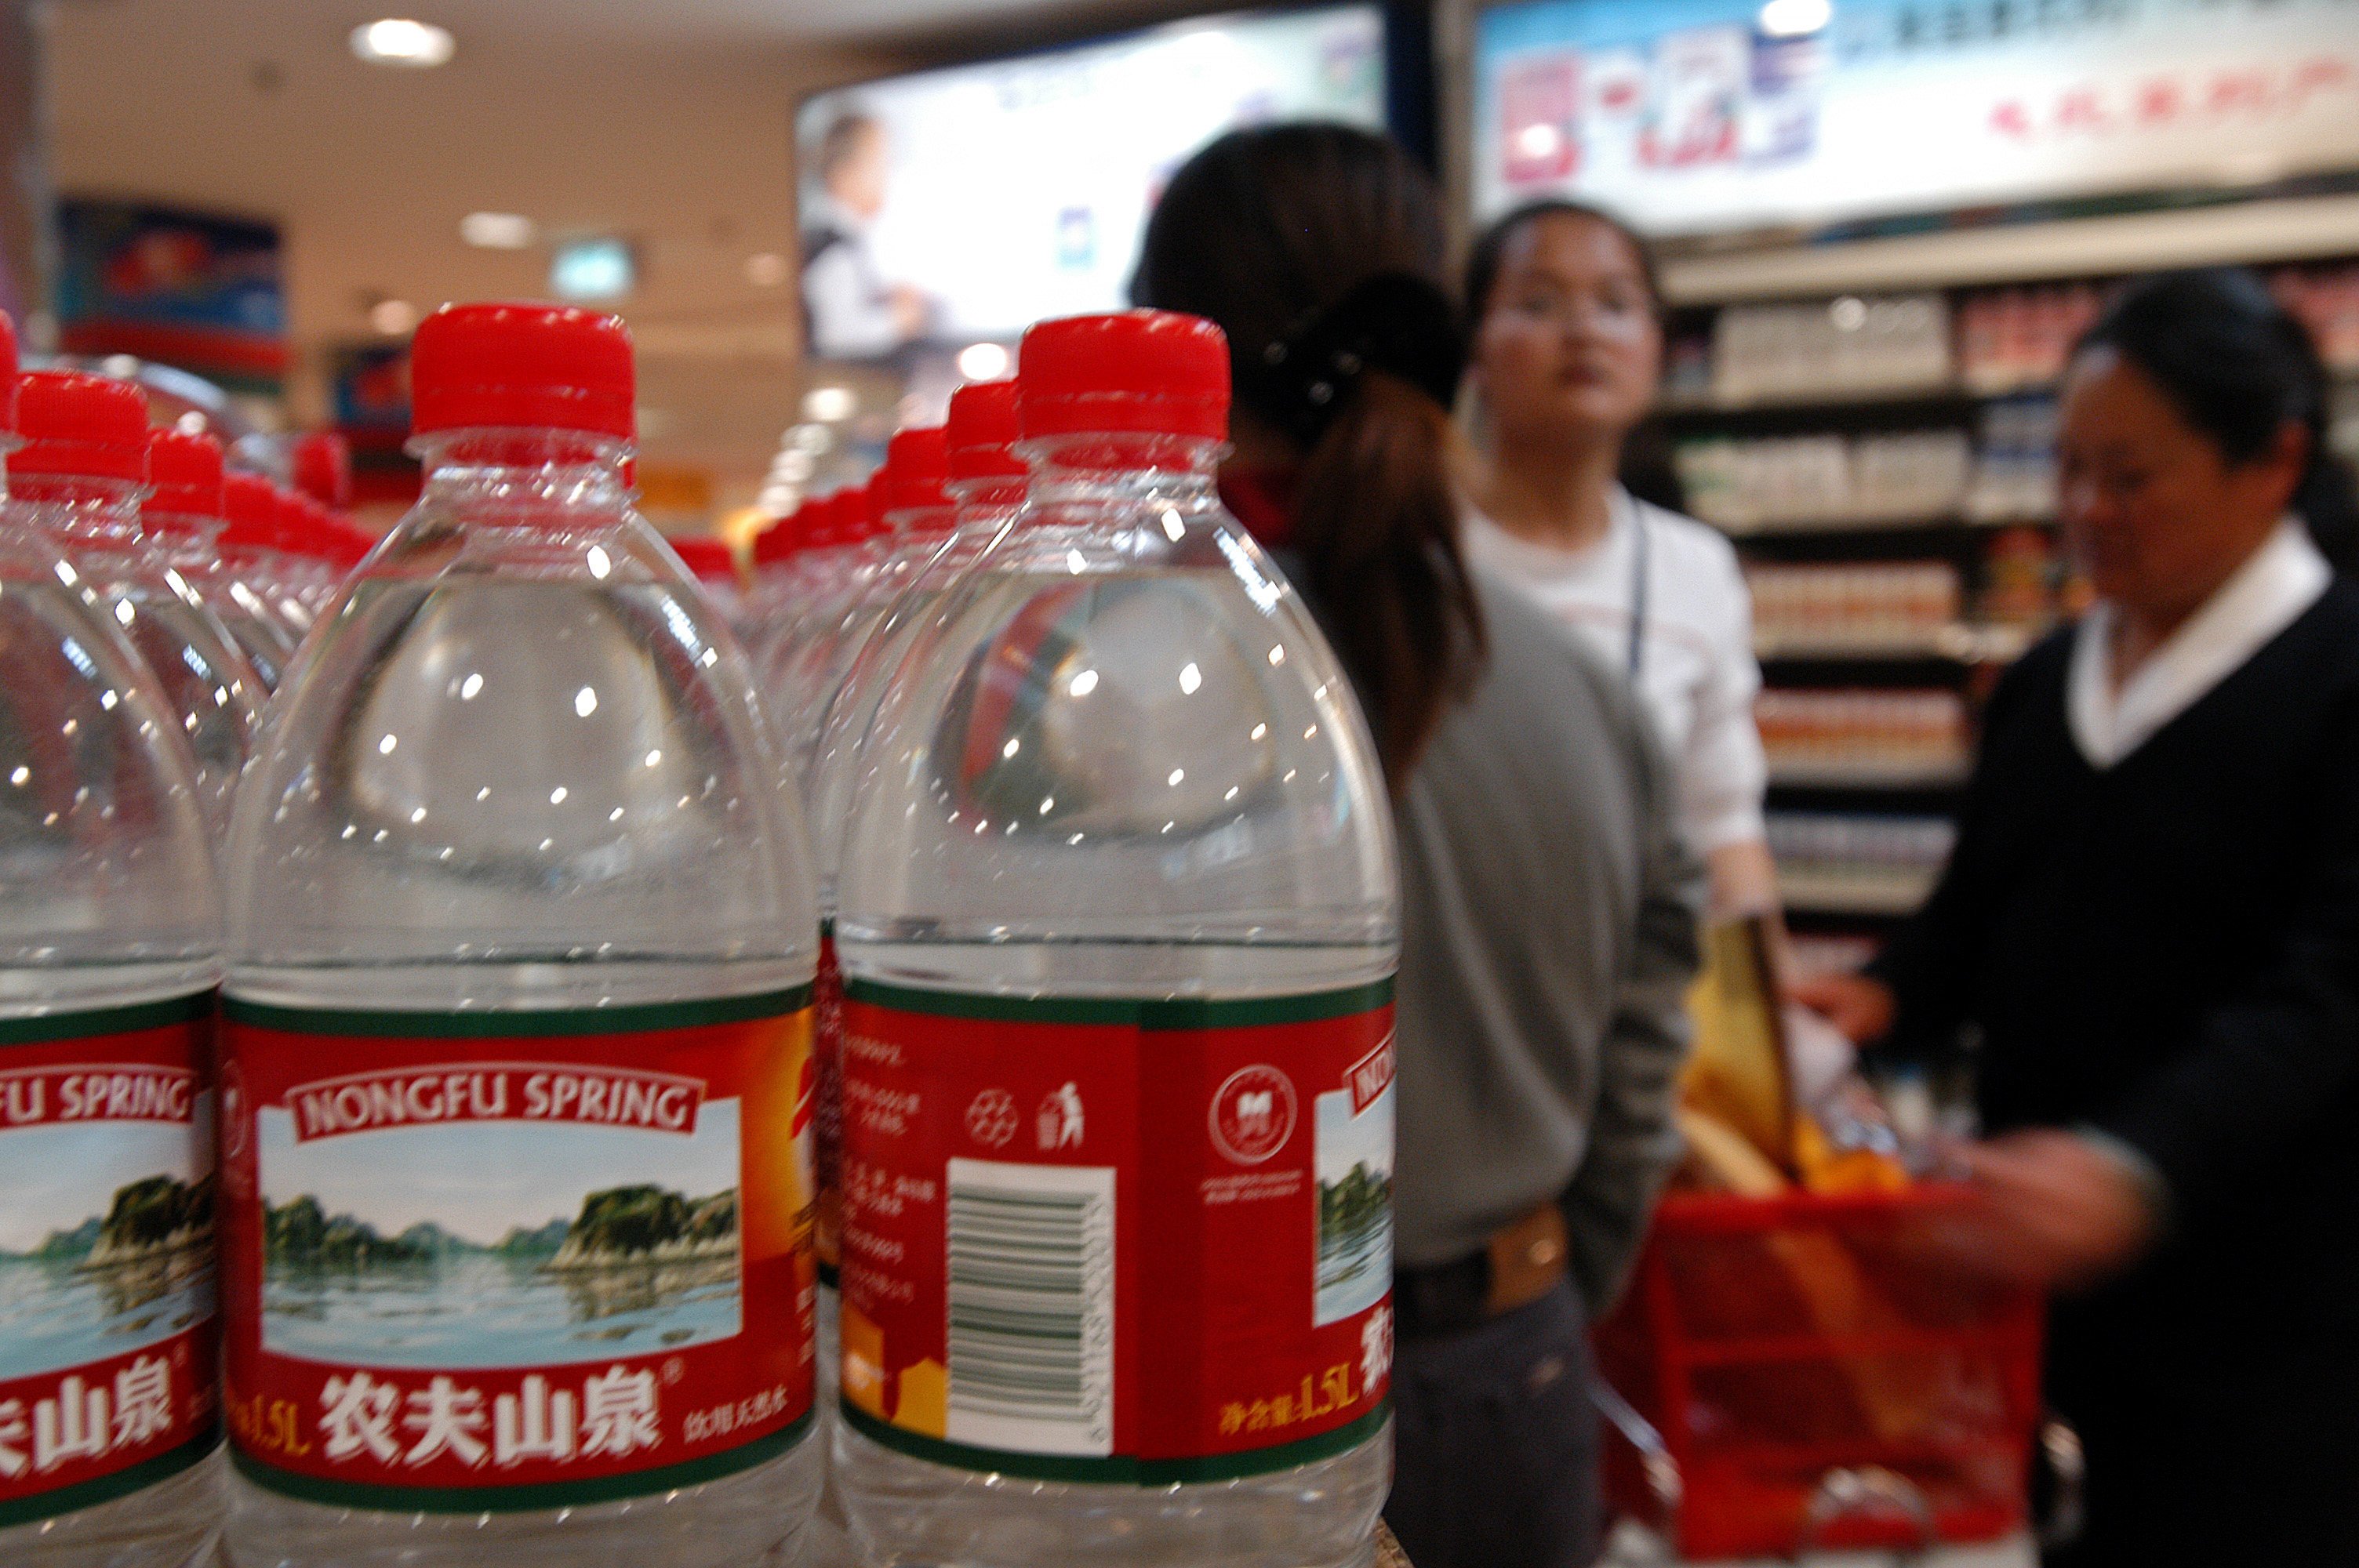 Drinking water produced by Nongfu Spring on display in a supermarket in Beijing. Photo: Handout